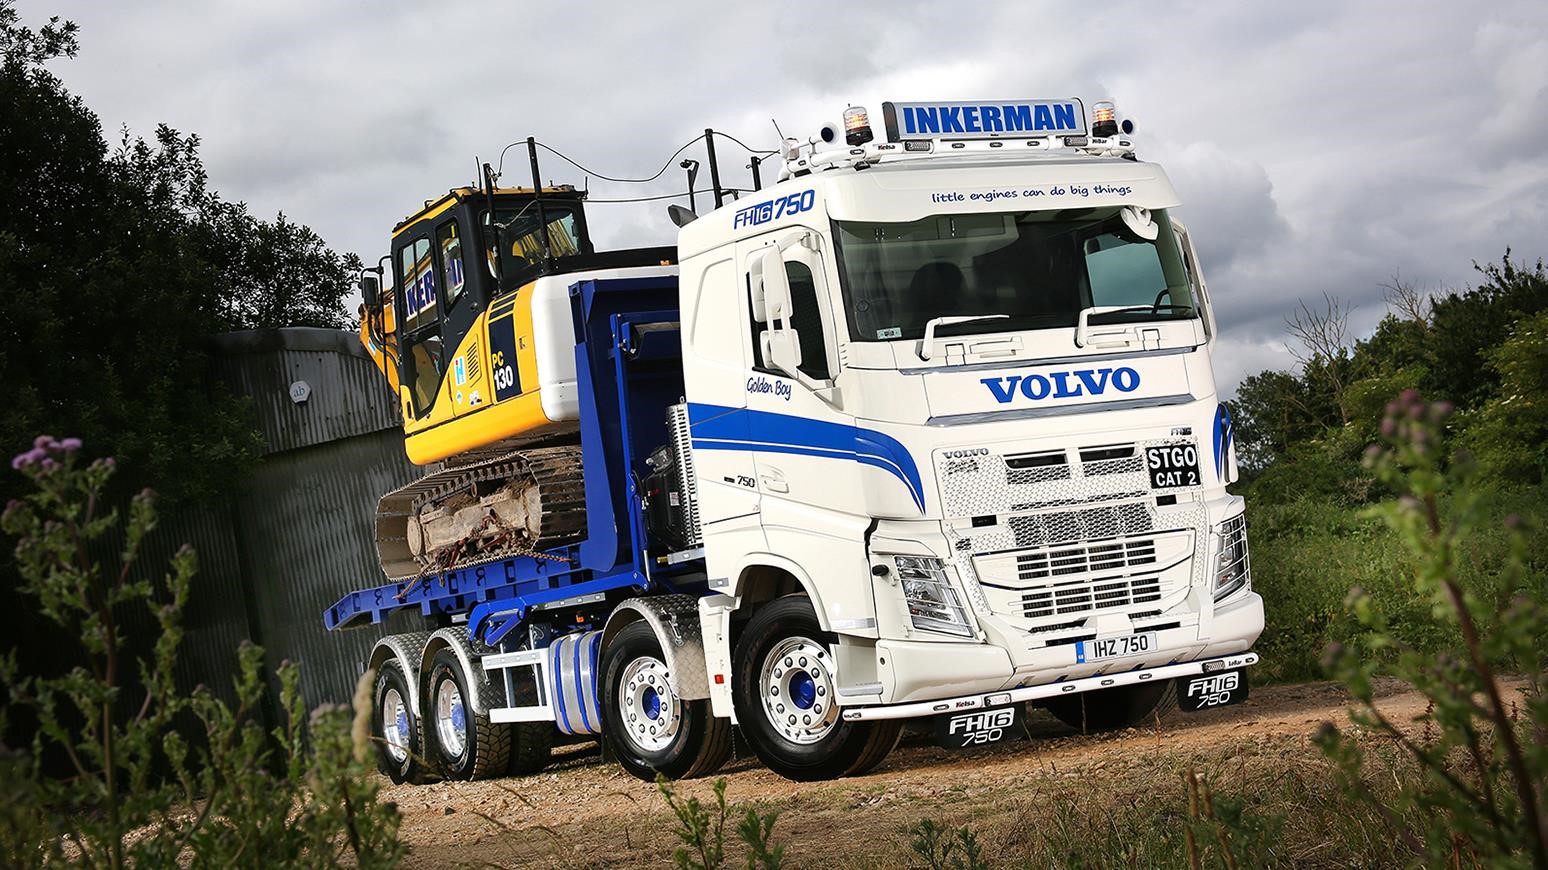 Inkerman Hire Services Enlists FH16-750 8x4 Rigid Truck For Heavy-Duty Work